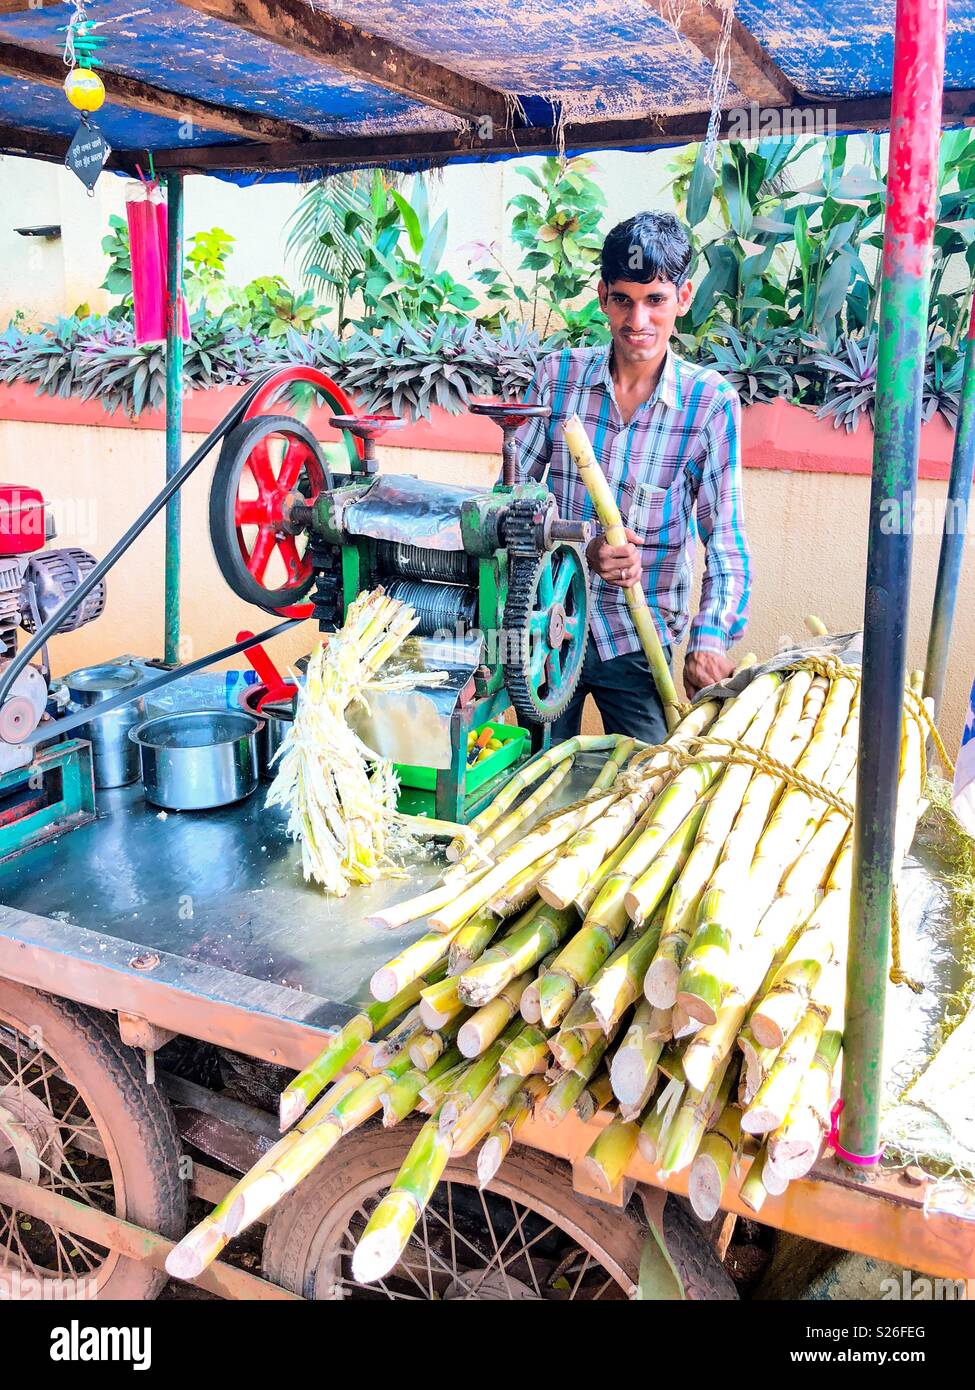 A gentleman working a sugarcane drink machine from a roadside vehicle in India Stock Photo